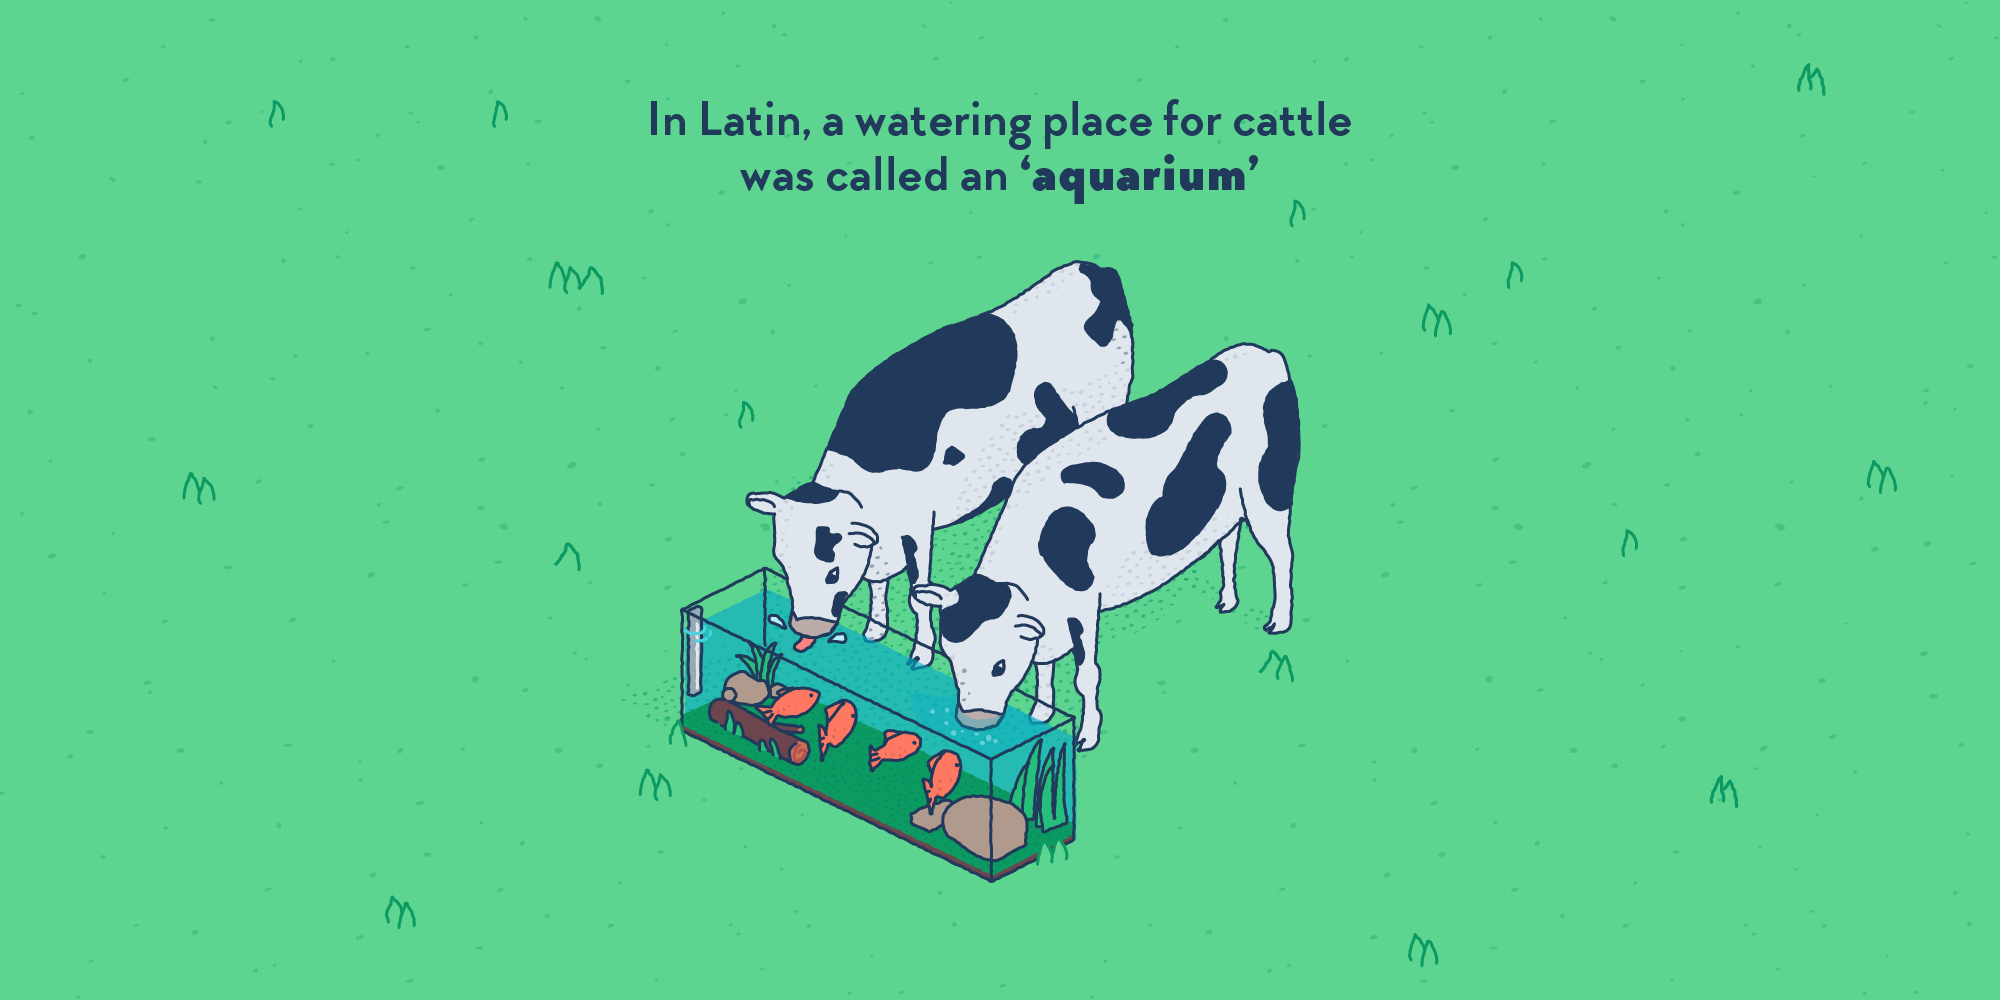 Two cows drinking from a glass aquarium full of fish.